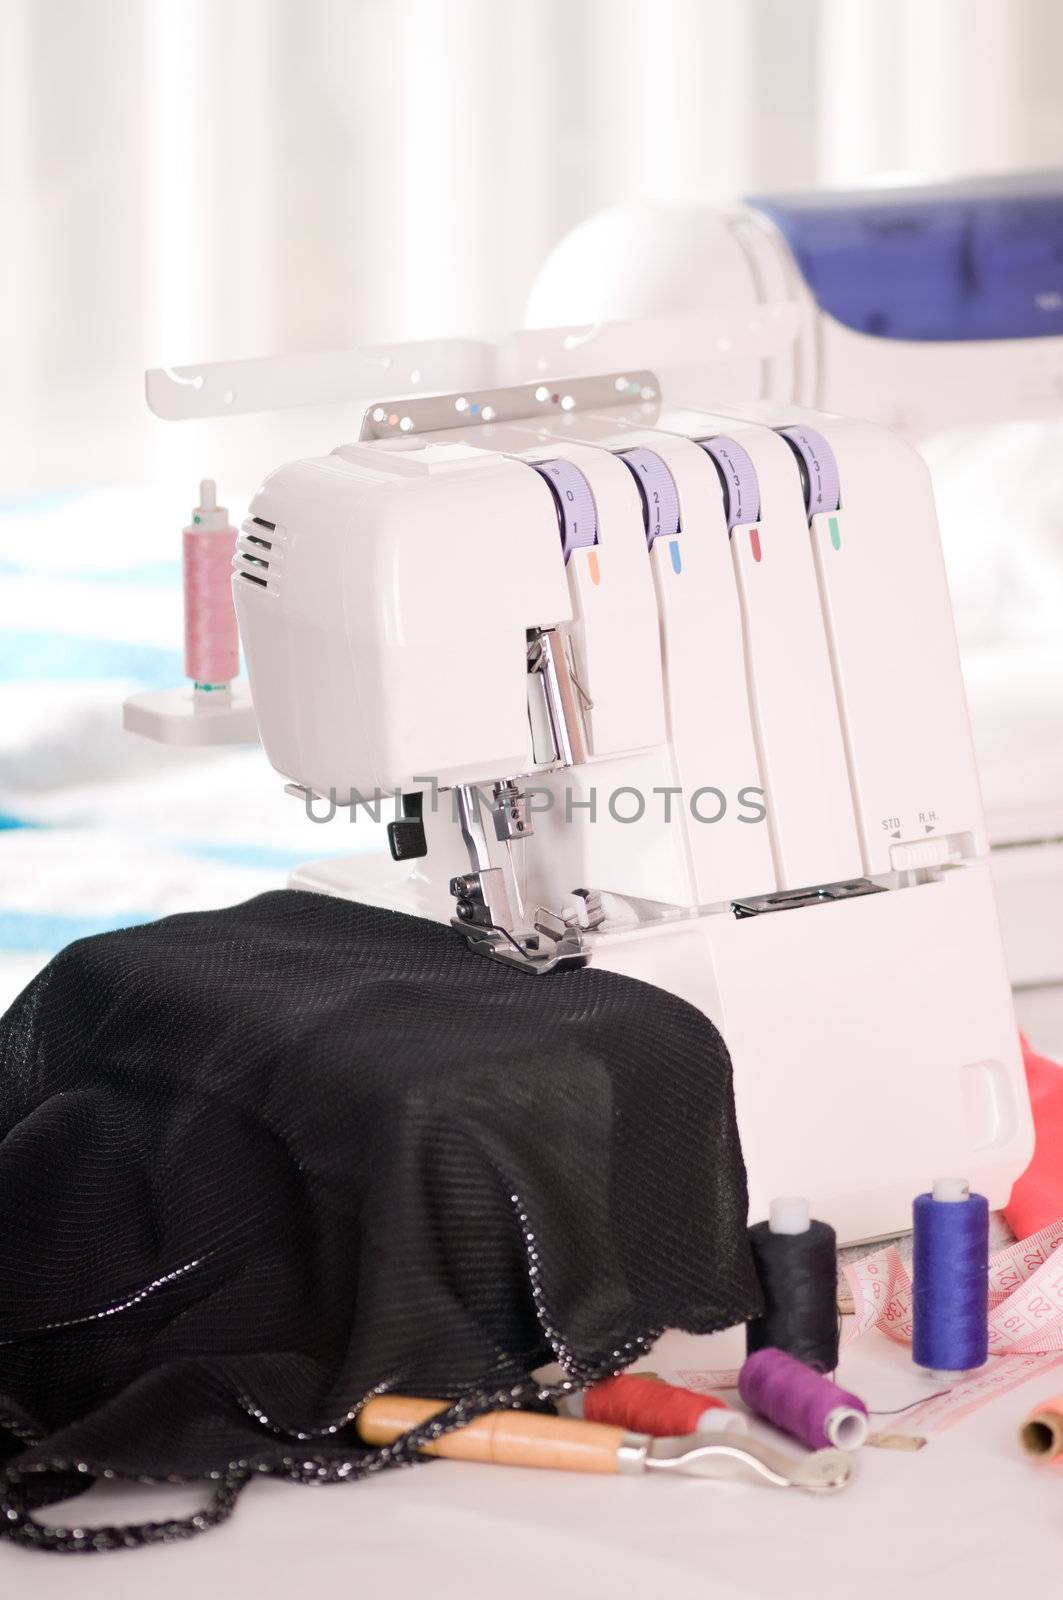 overlock and sewing machine is on the table